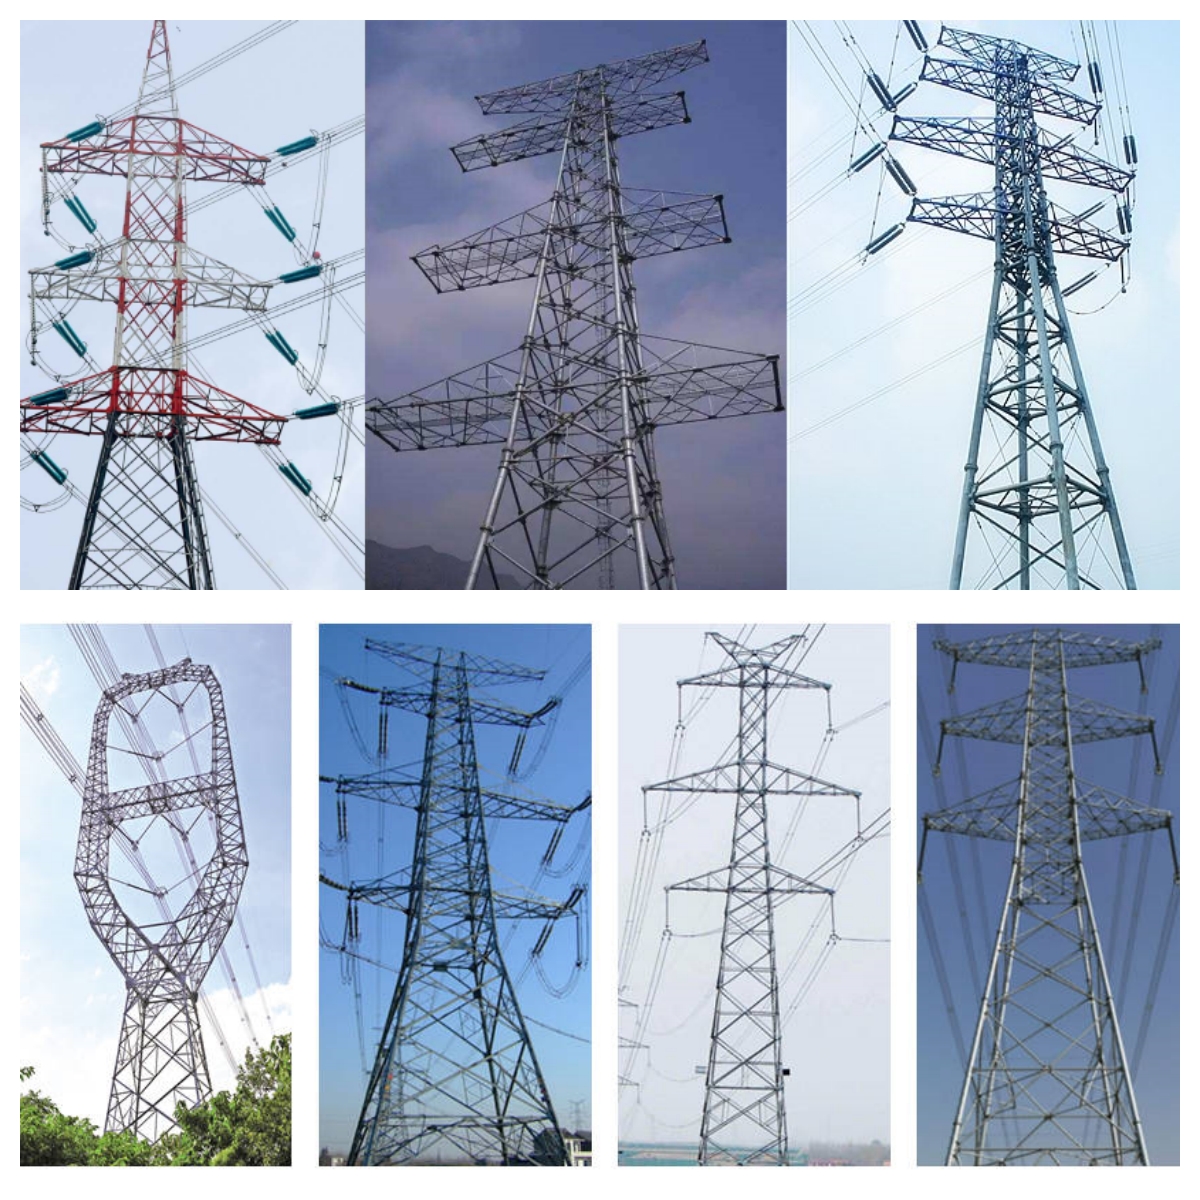 electric power tower